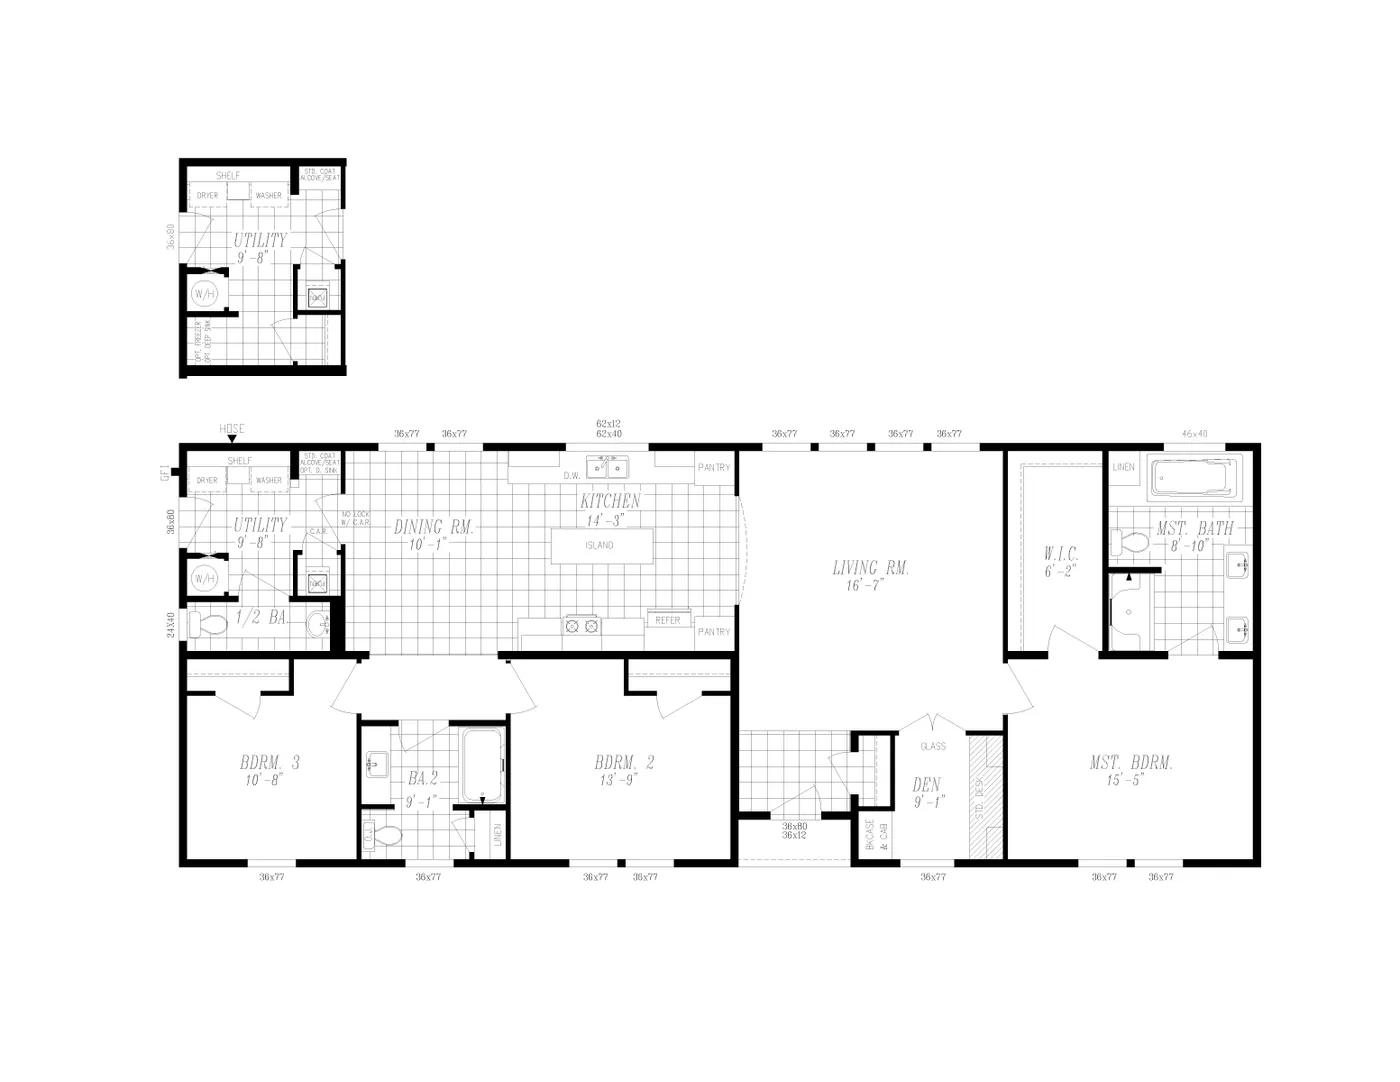 The 2868 MARLETTE SPECIAL Floor Plan. This Manufactured Mobile Home features 3 bedrooms and 2.5 baths.